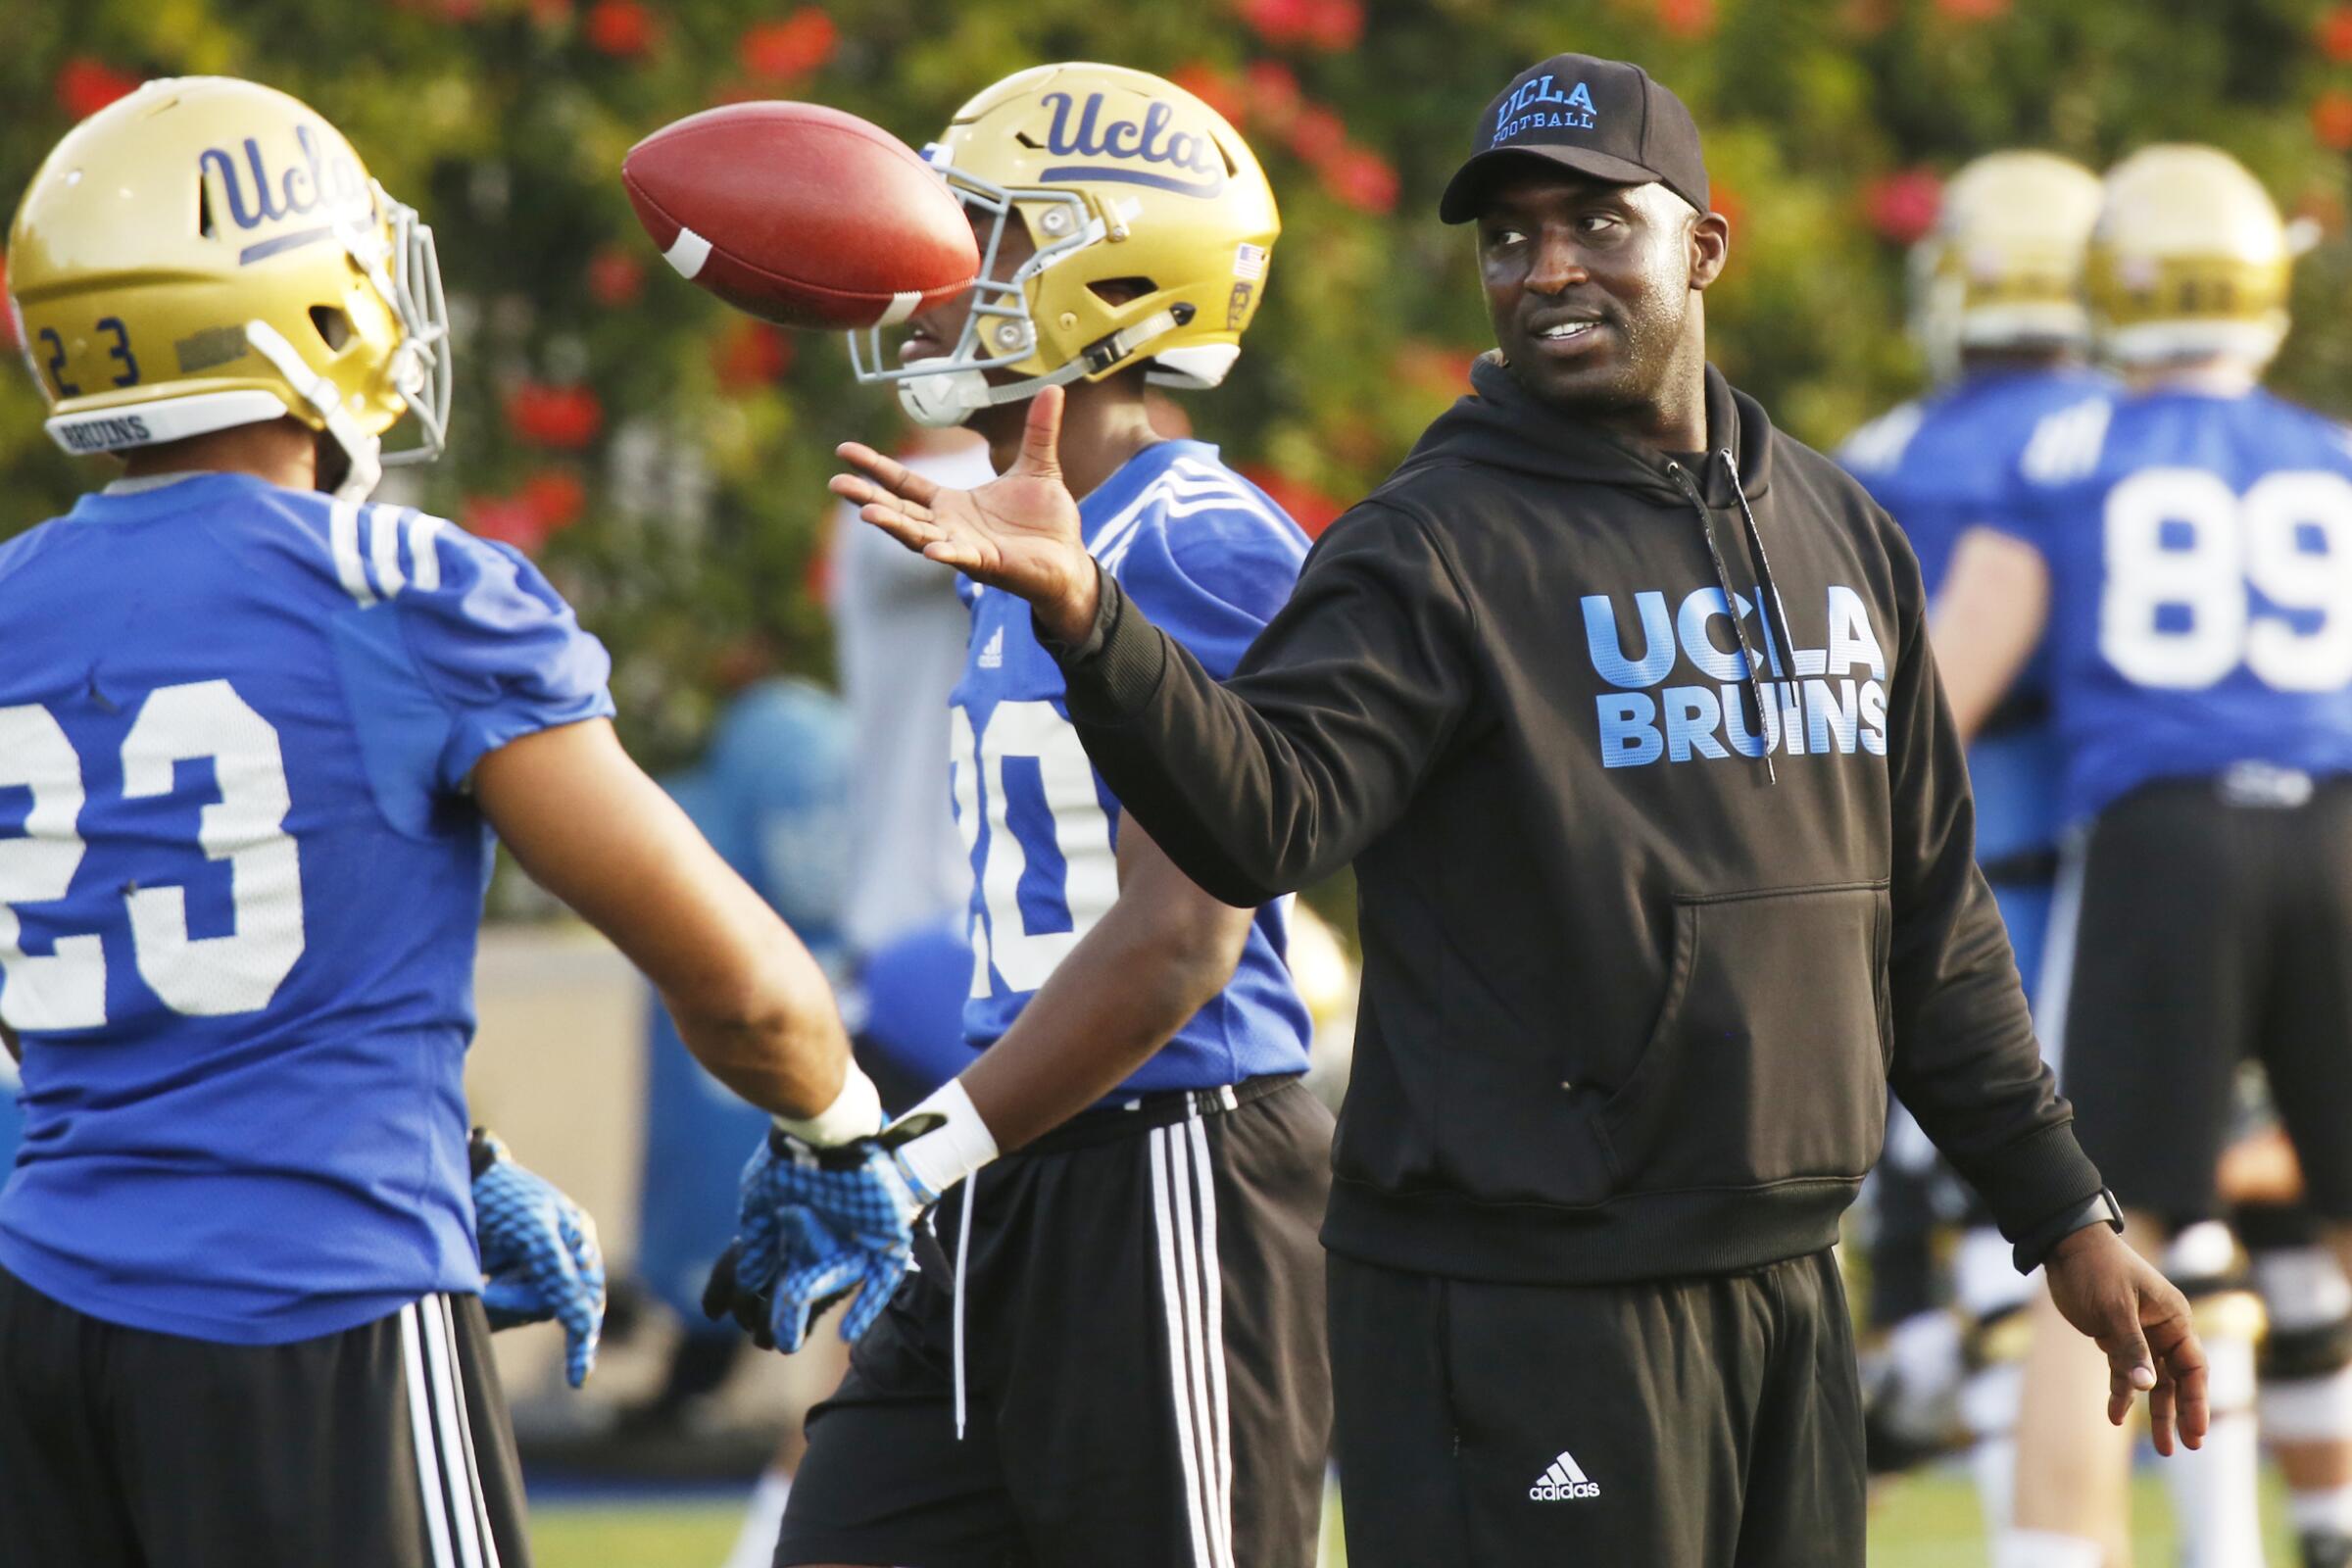 UCLA assistant coach DeShaun Foster flips a ball to a player between drills during practice.